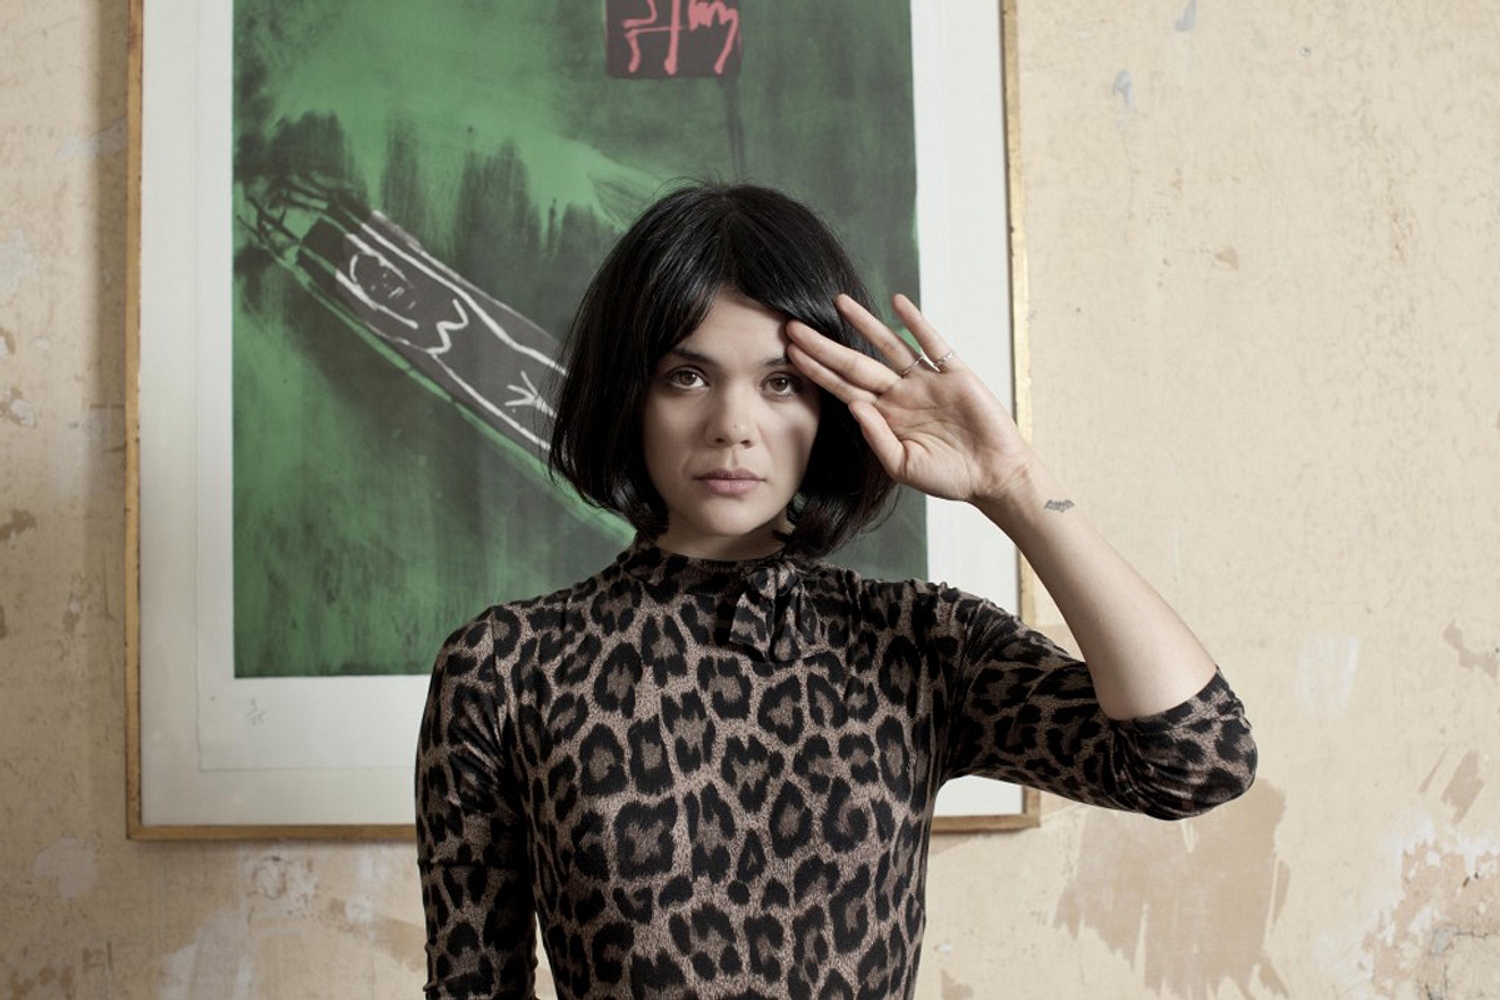 Bat For Lashes posts cryptic hangman images